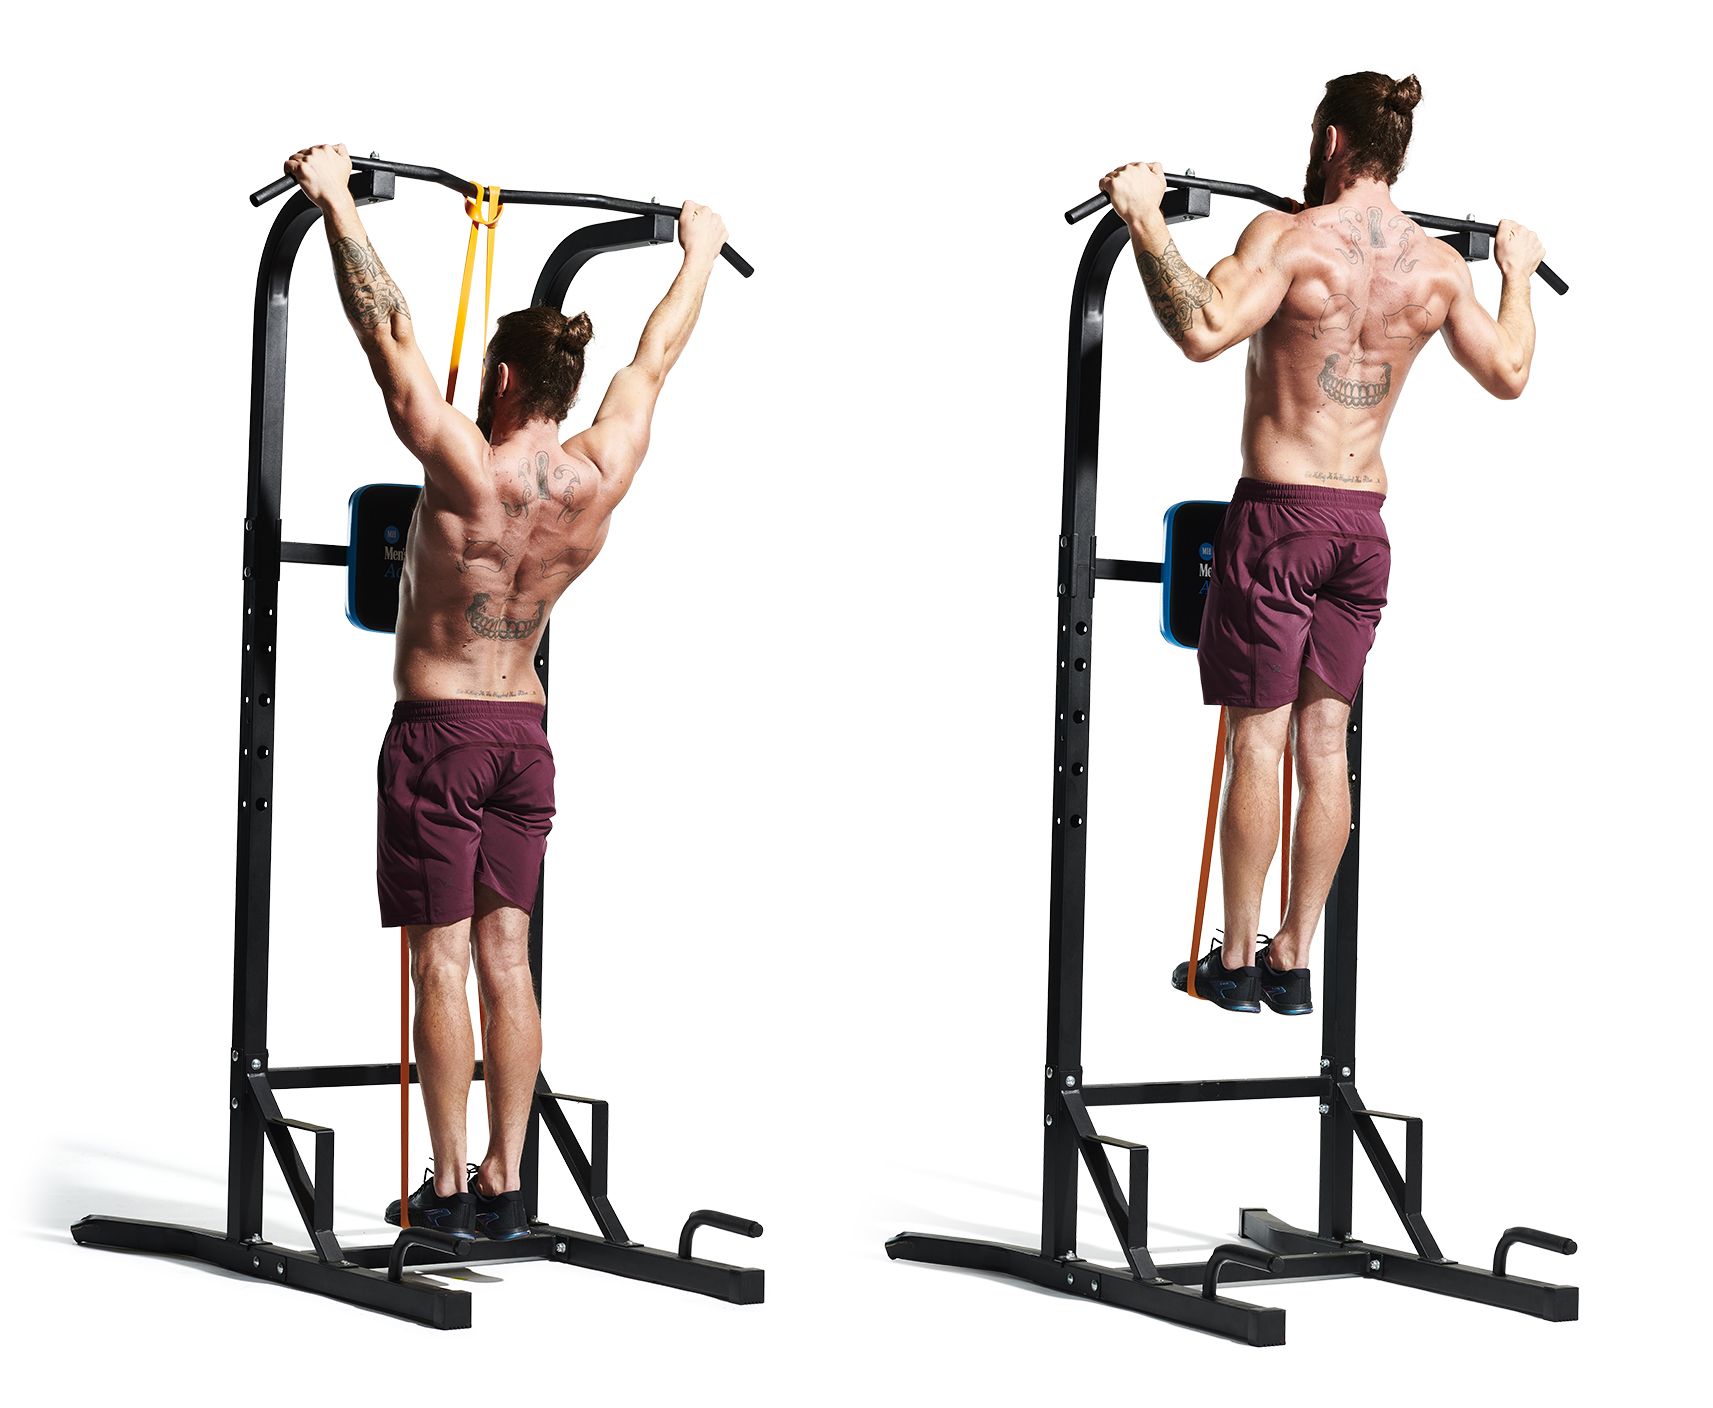 Resistance Bands Exercise Ideal for Pull-up Assist Bodybuilding Powerlifting 